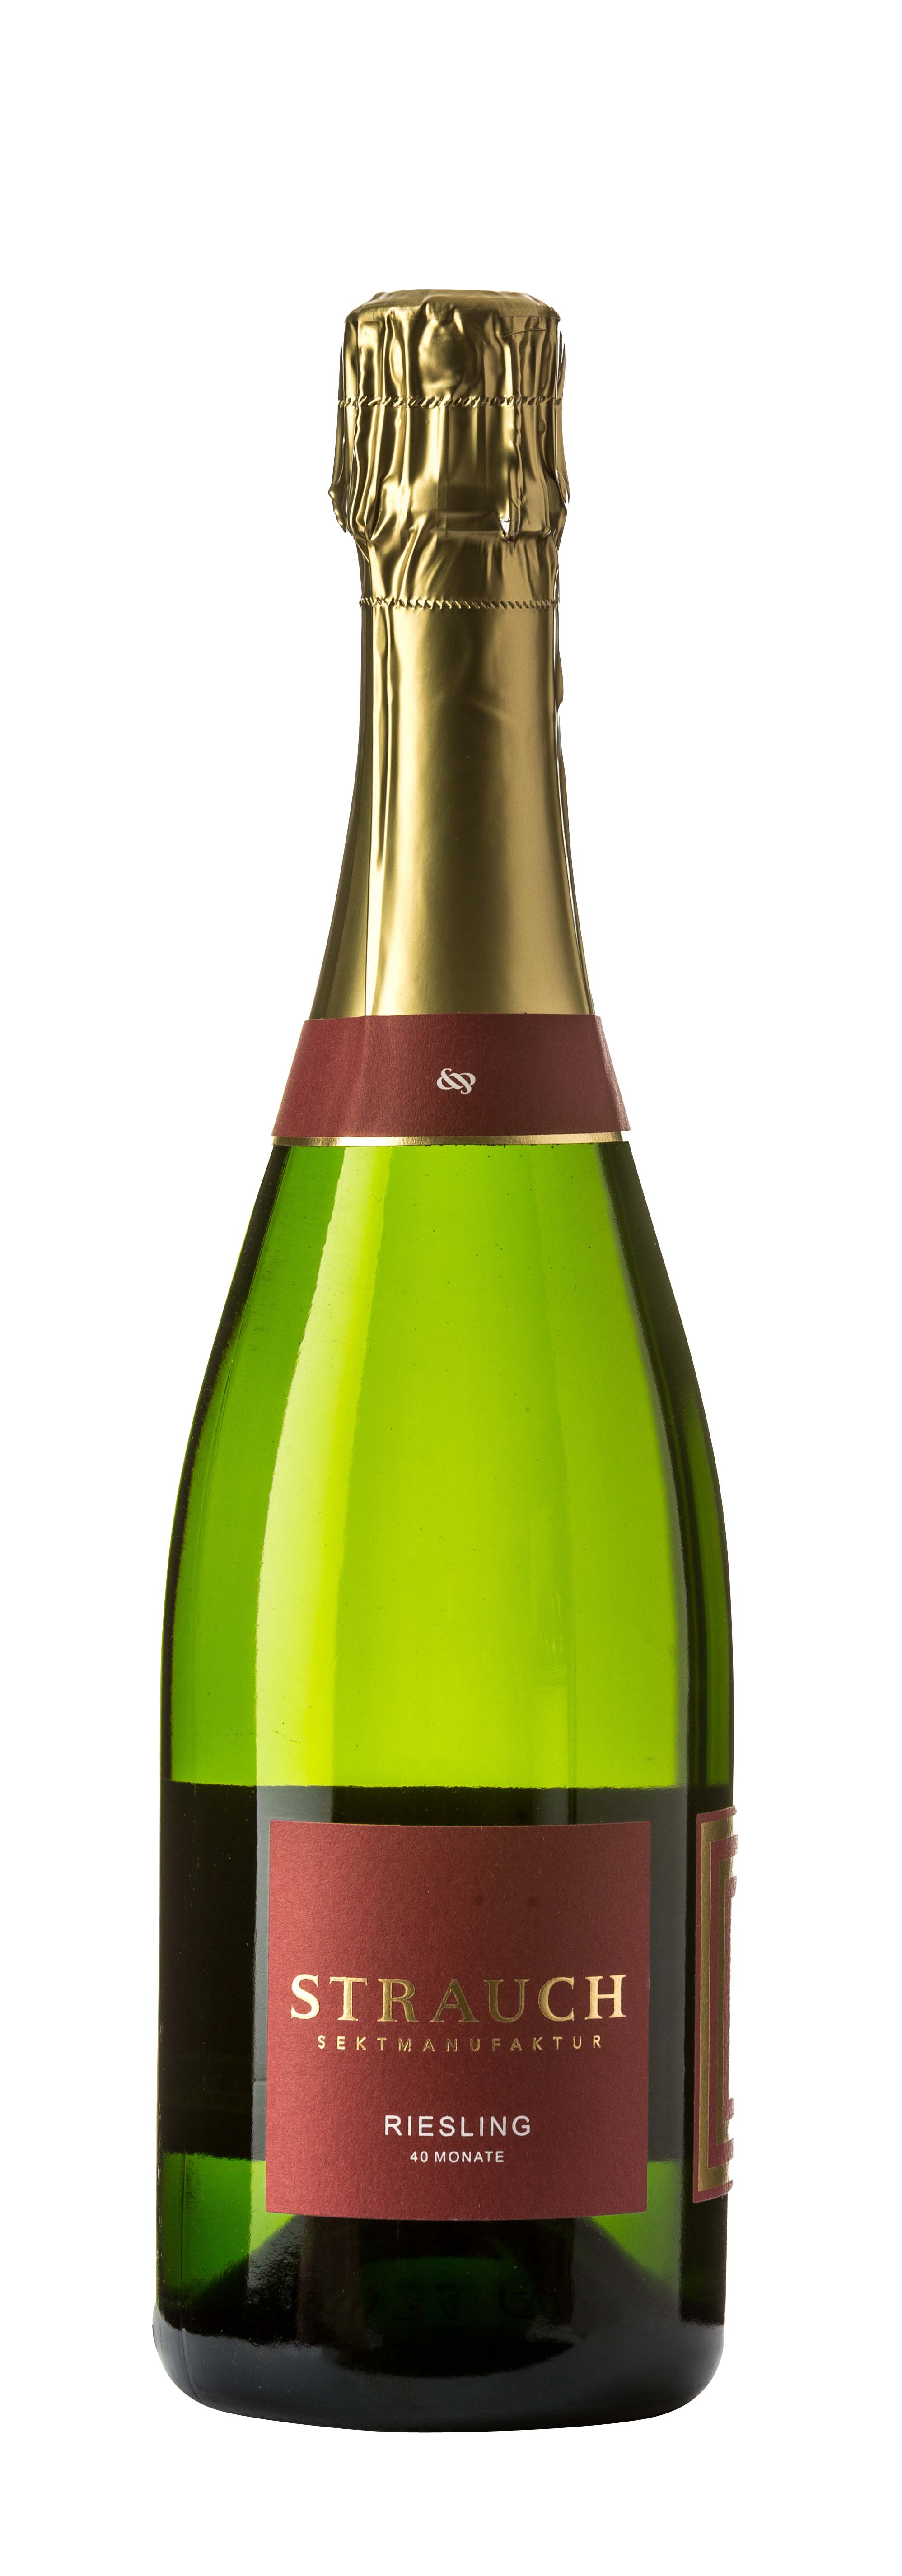 Riesling Extra Brut 2012